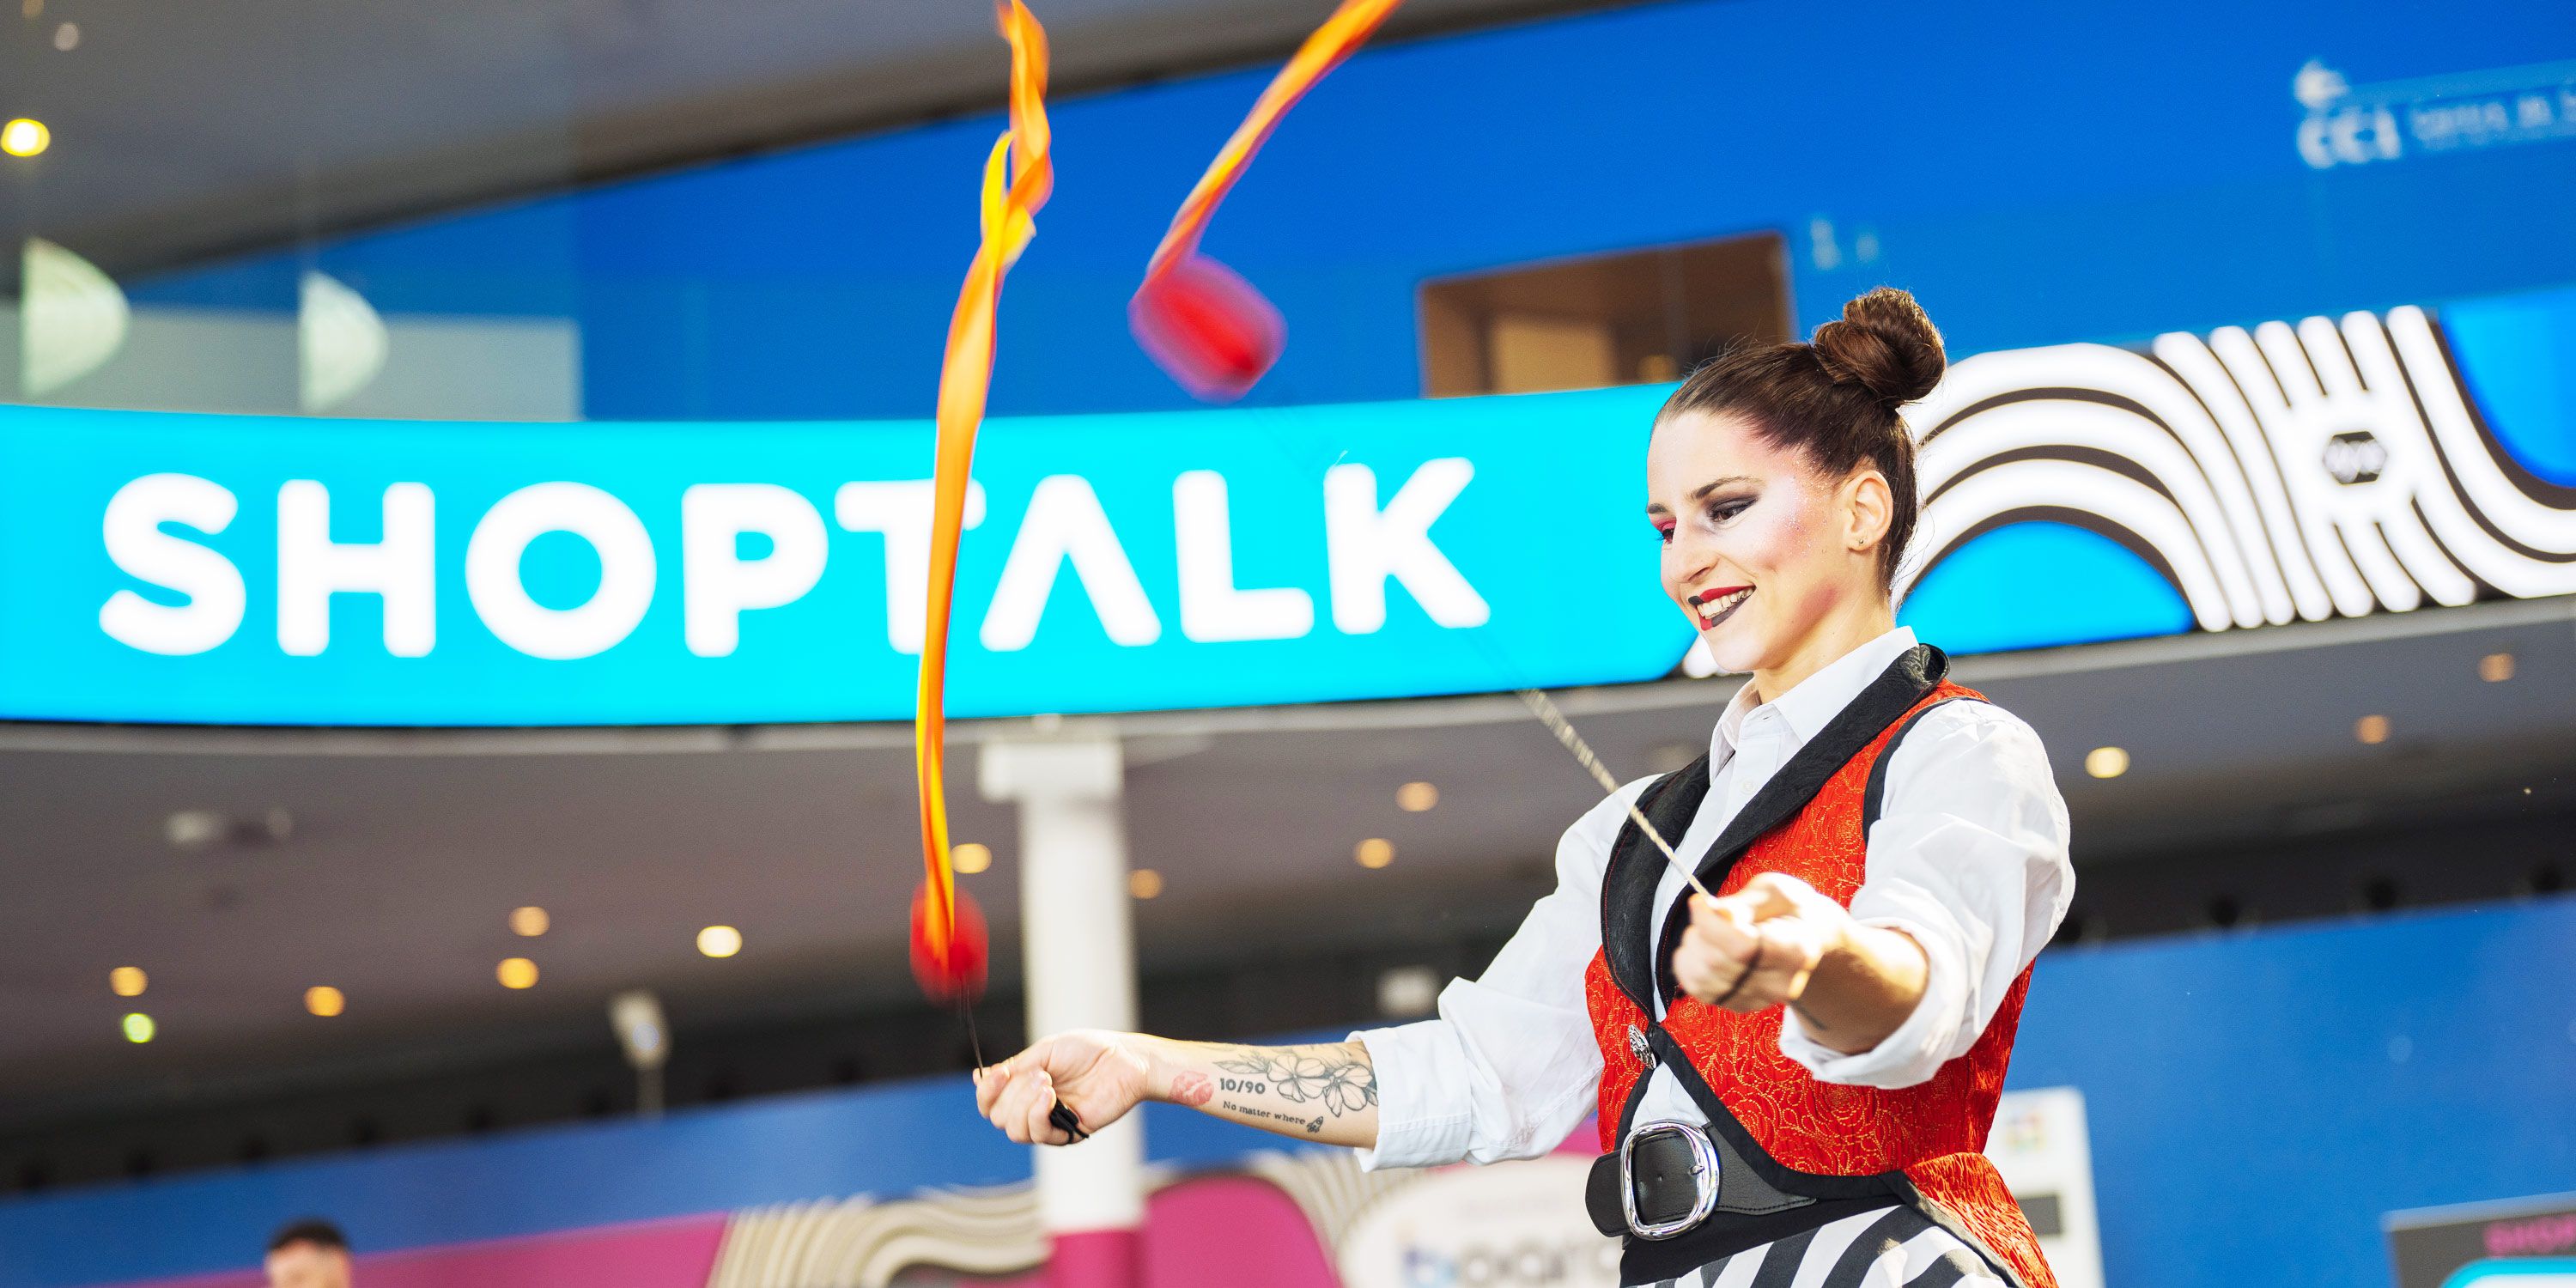 Second Year of Spectacular Circus for Barcelona ShopTalk Expo